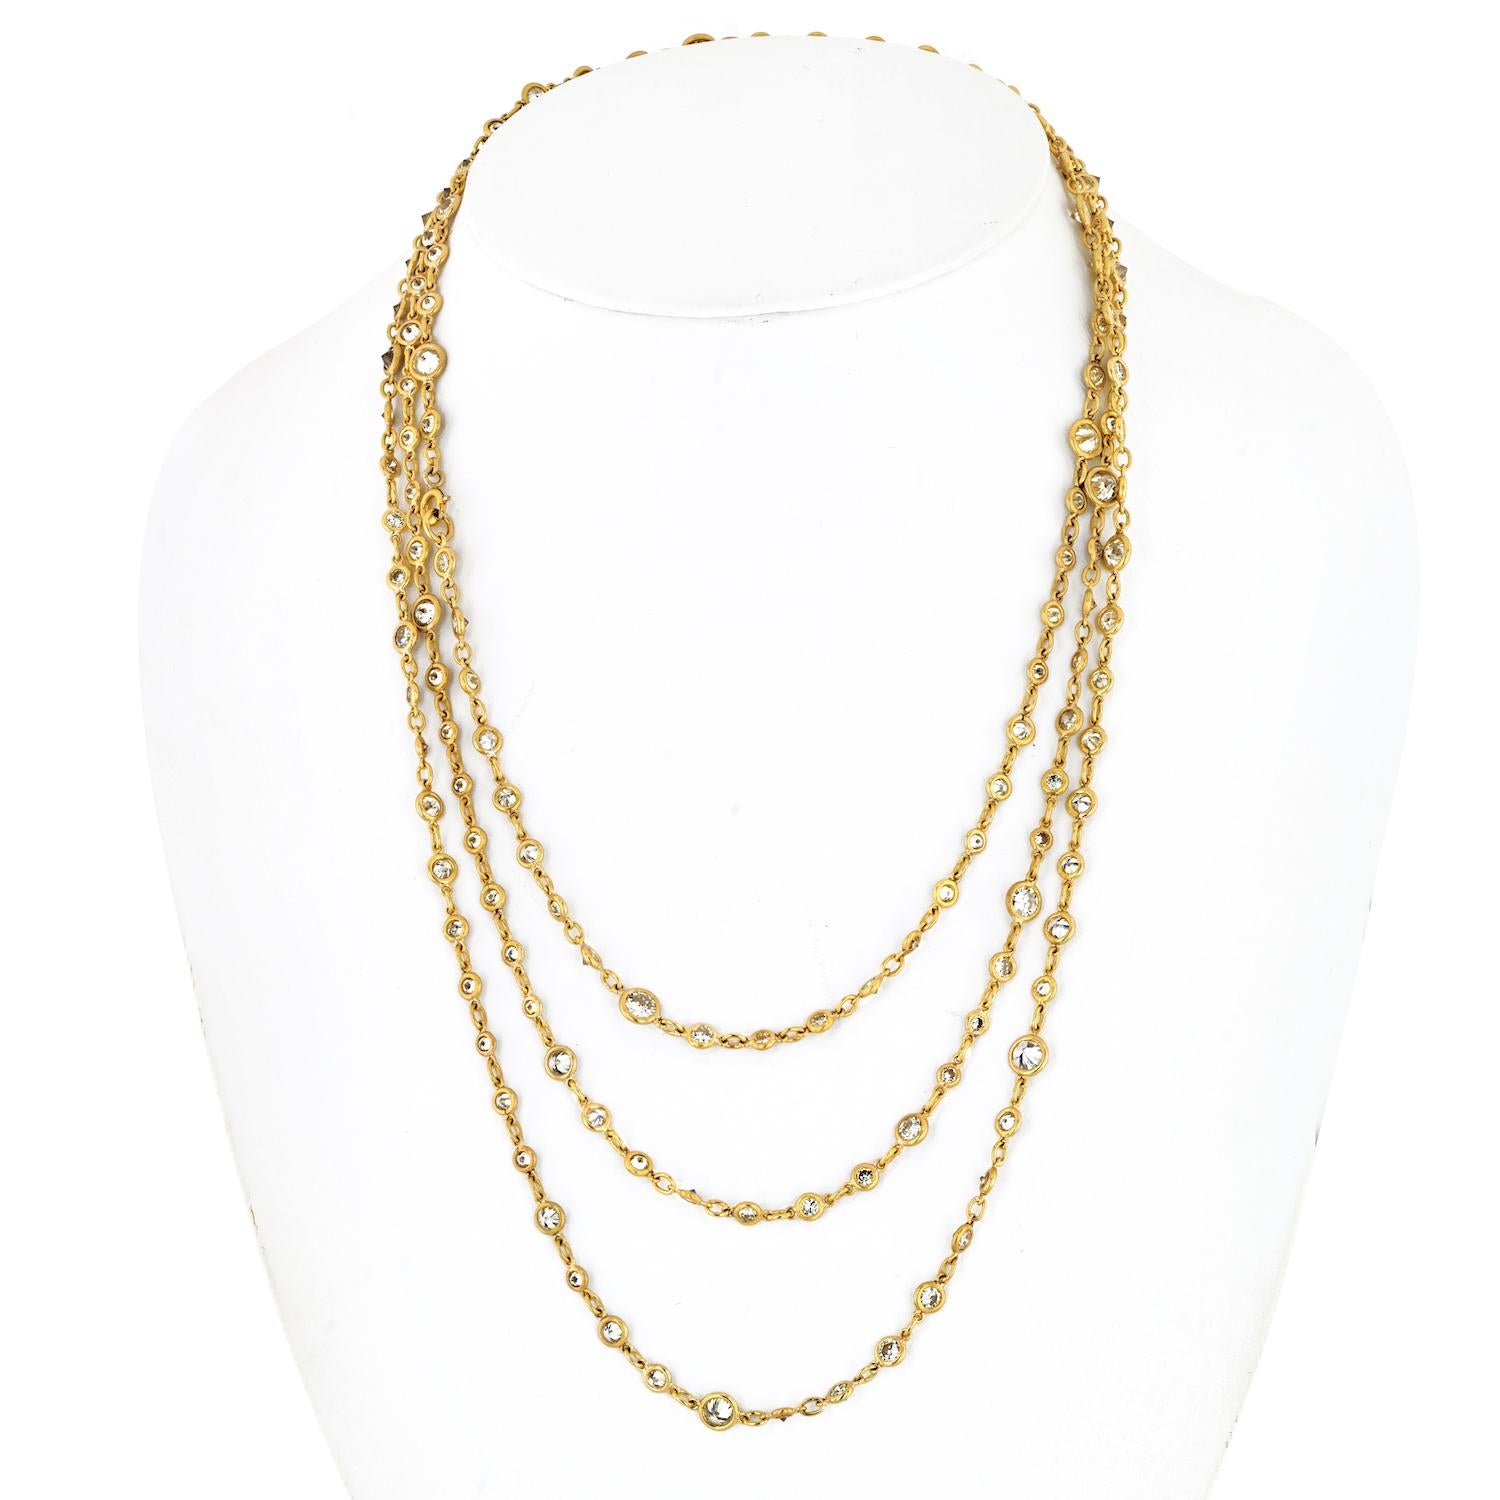 Elevate your jewelry collection with this stunning 18K Yellow Gold Round Cut Diamond By The Yard Necklace, measuring an impressive 60 inches in length and boasting a remarkable total carat weight of 30.00 carats. This necklace is the epitome of